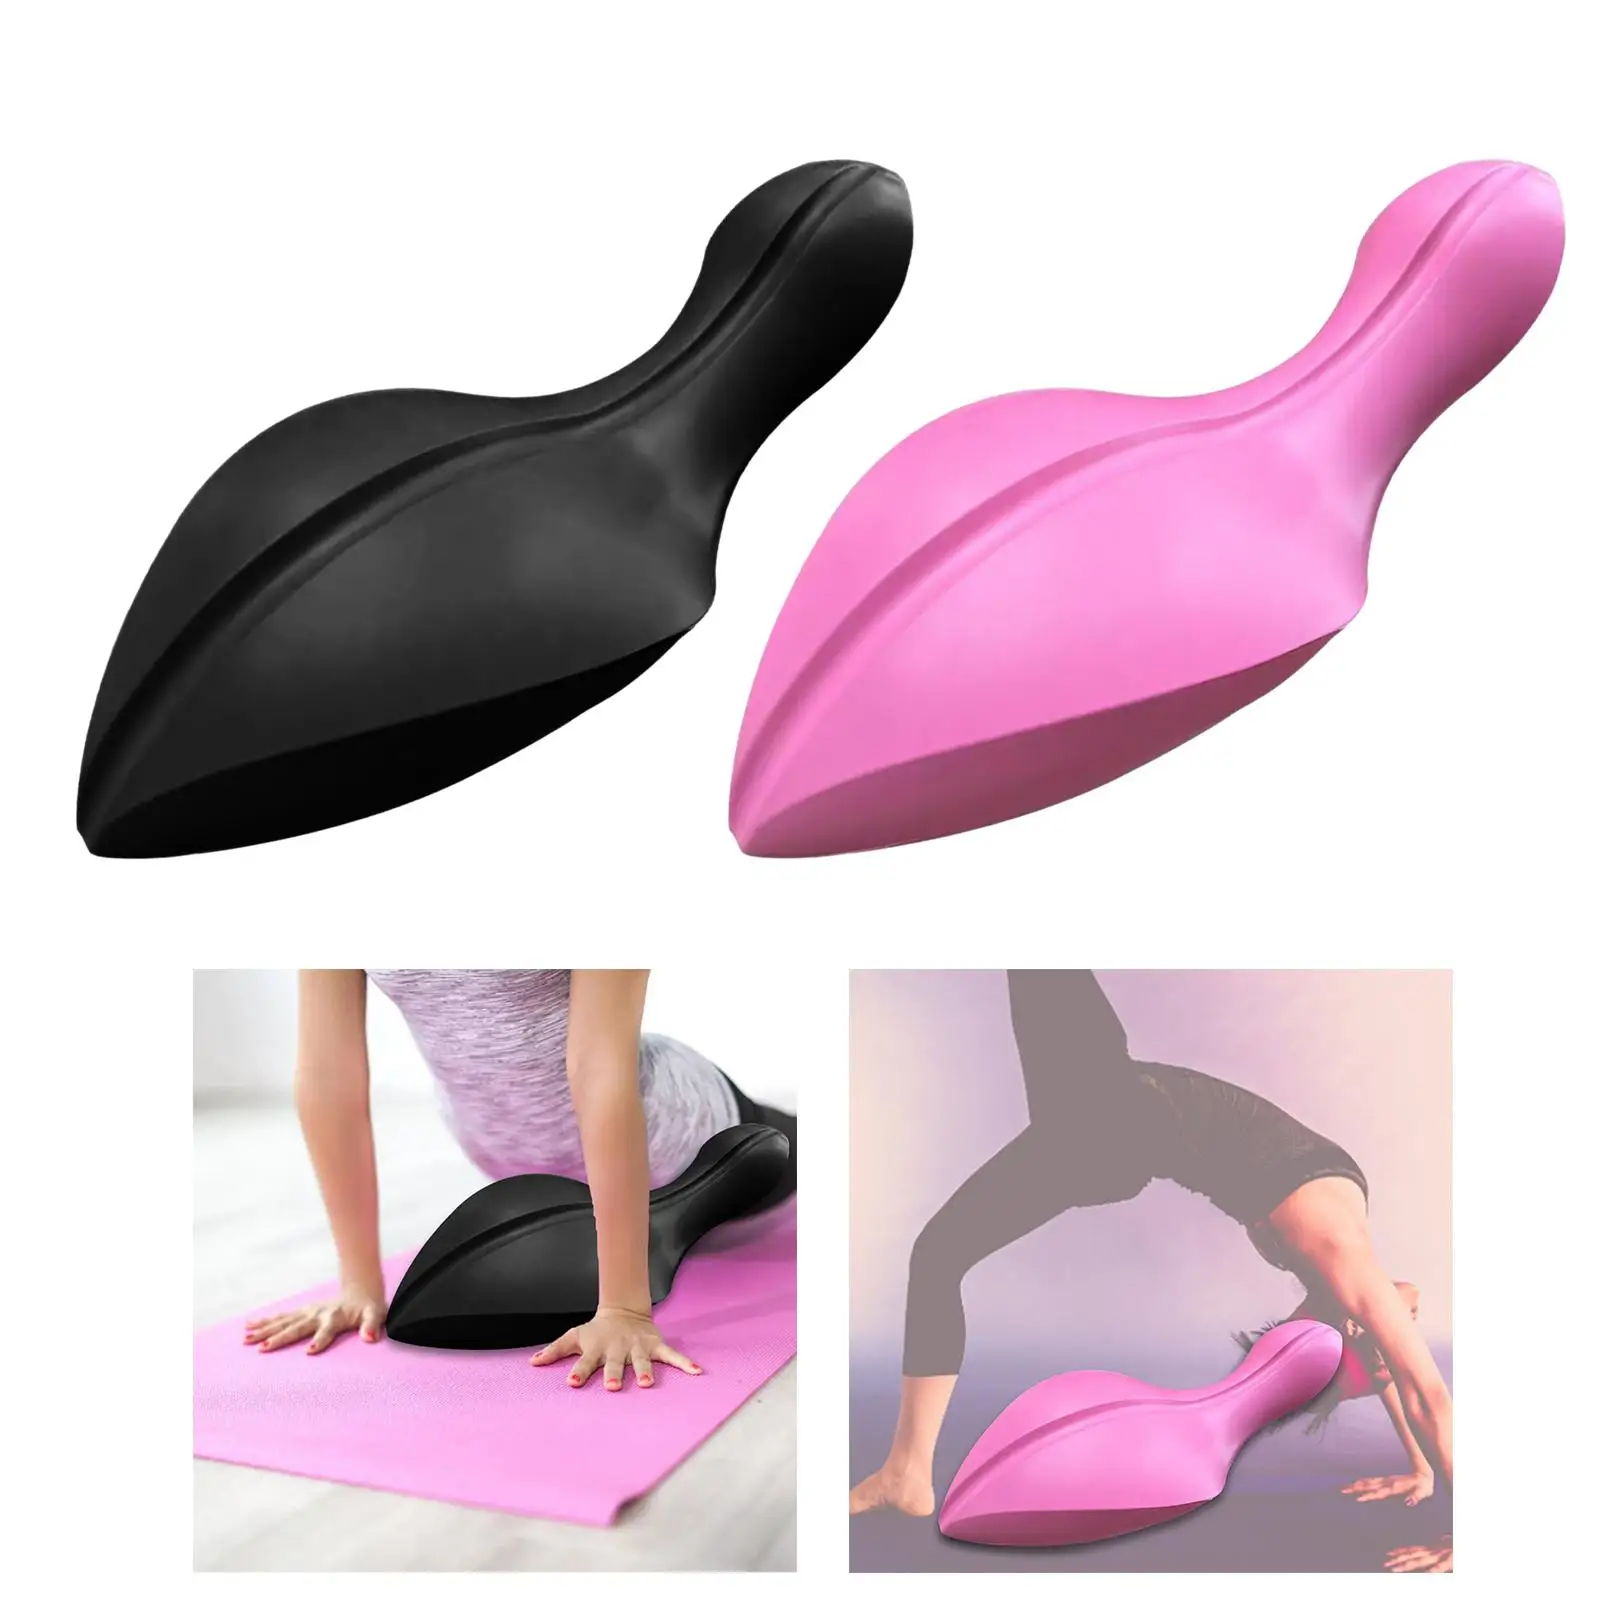 Pilates Yoga Spine Correction Fitness Equipment ARC Bending Training Accessories Spinal Orthosis for Home Gym Back Curve